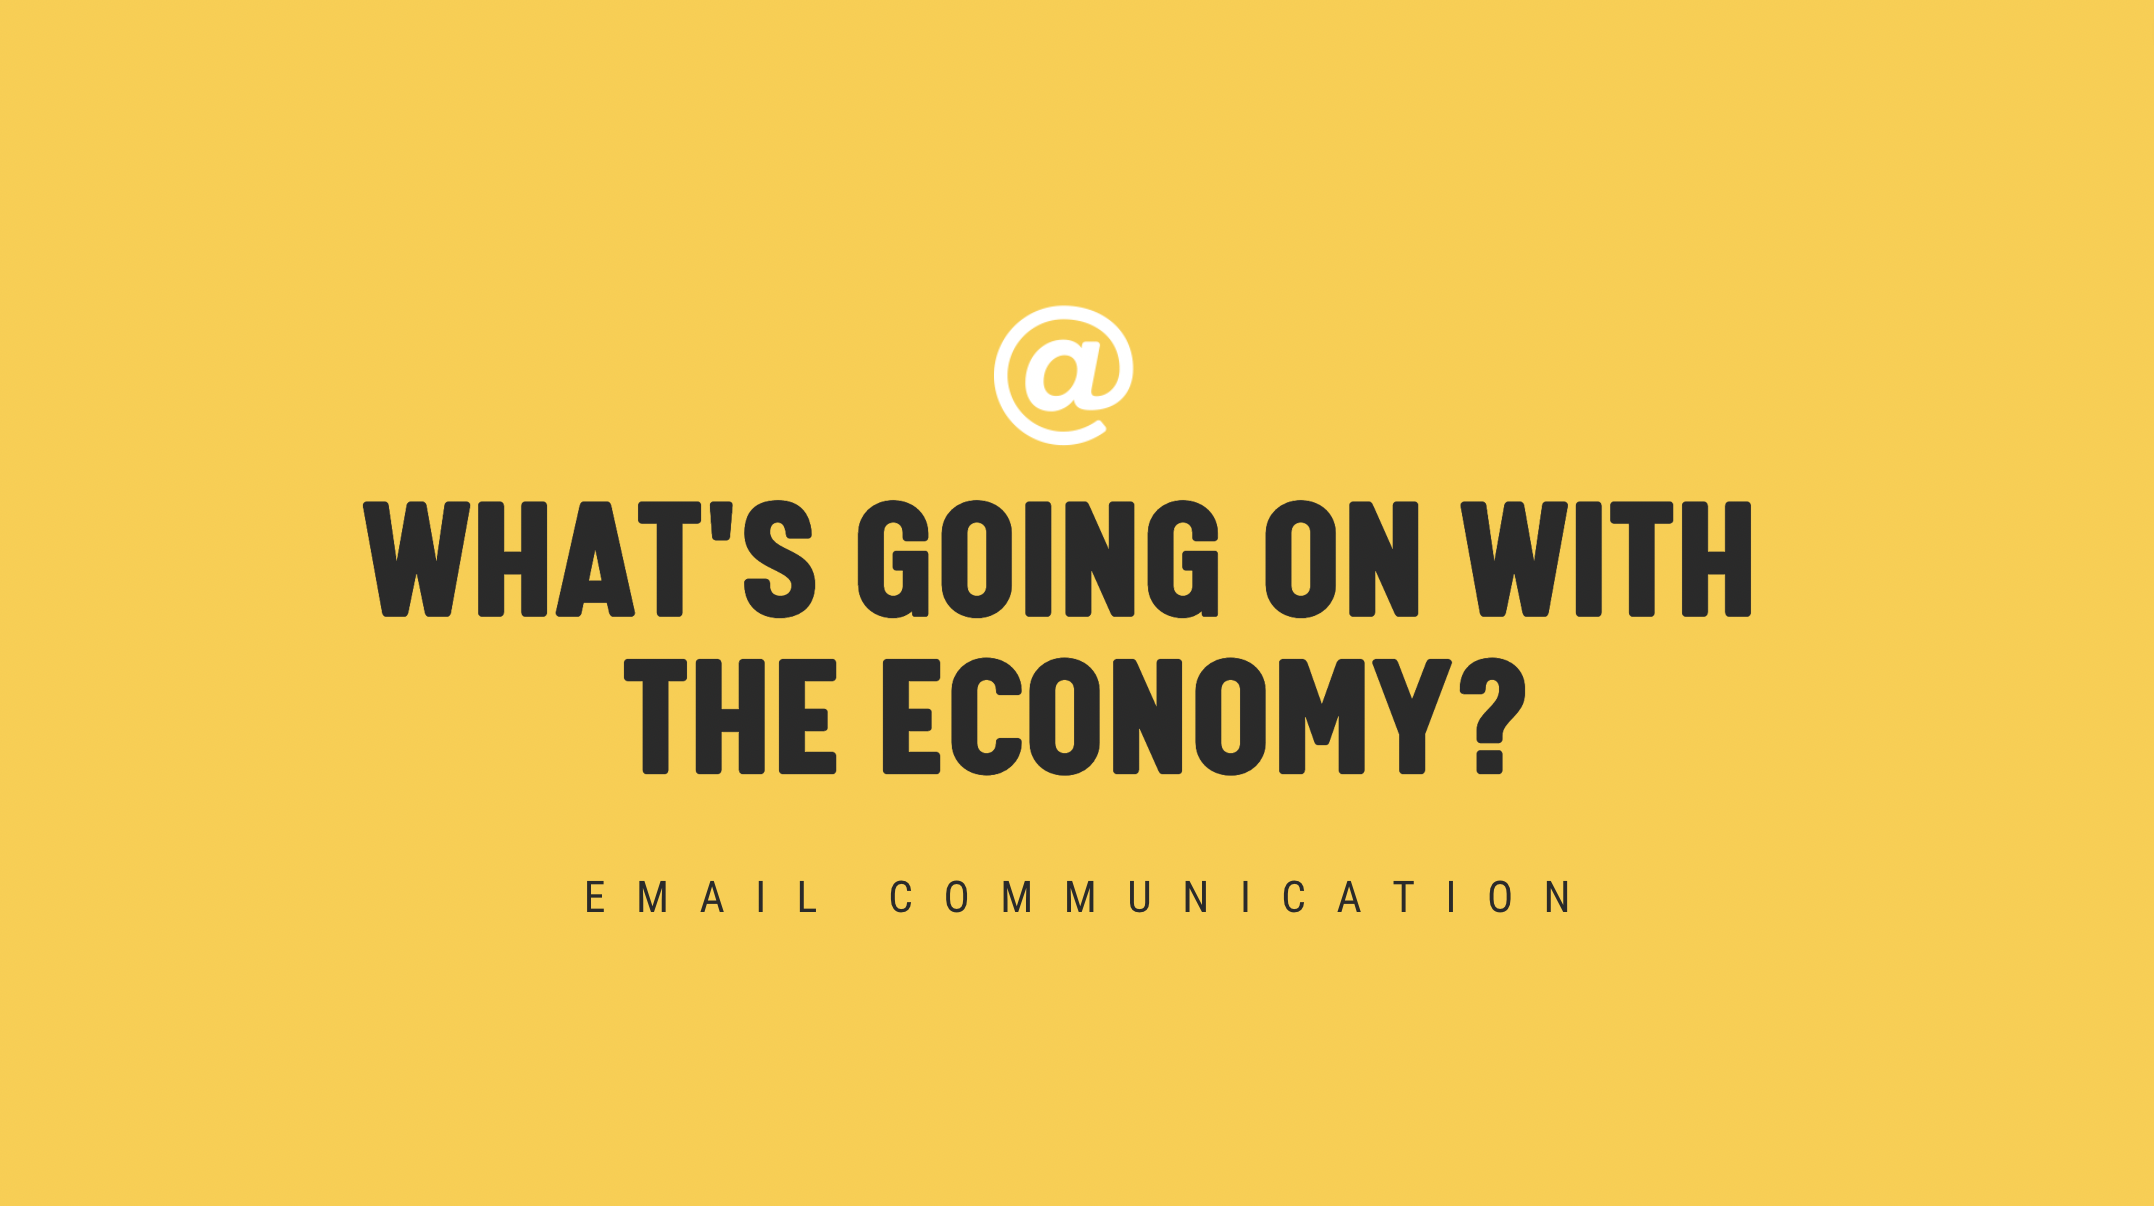 [NEW] What's Going on With the Economy? - Timely Email